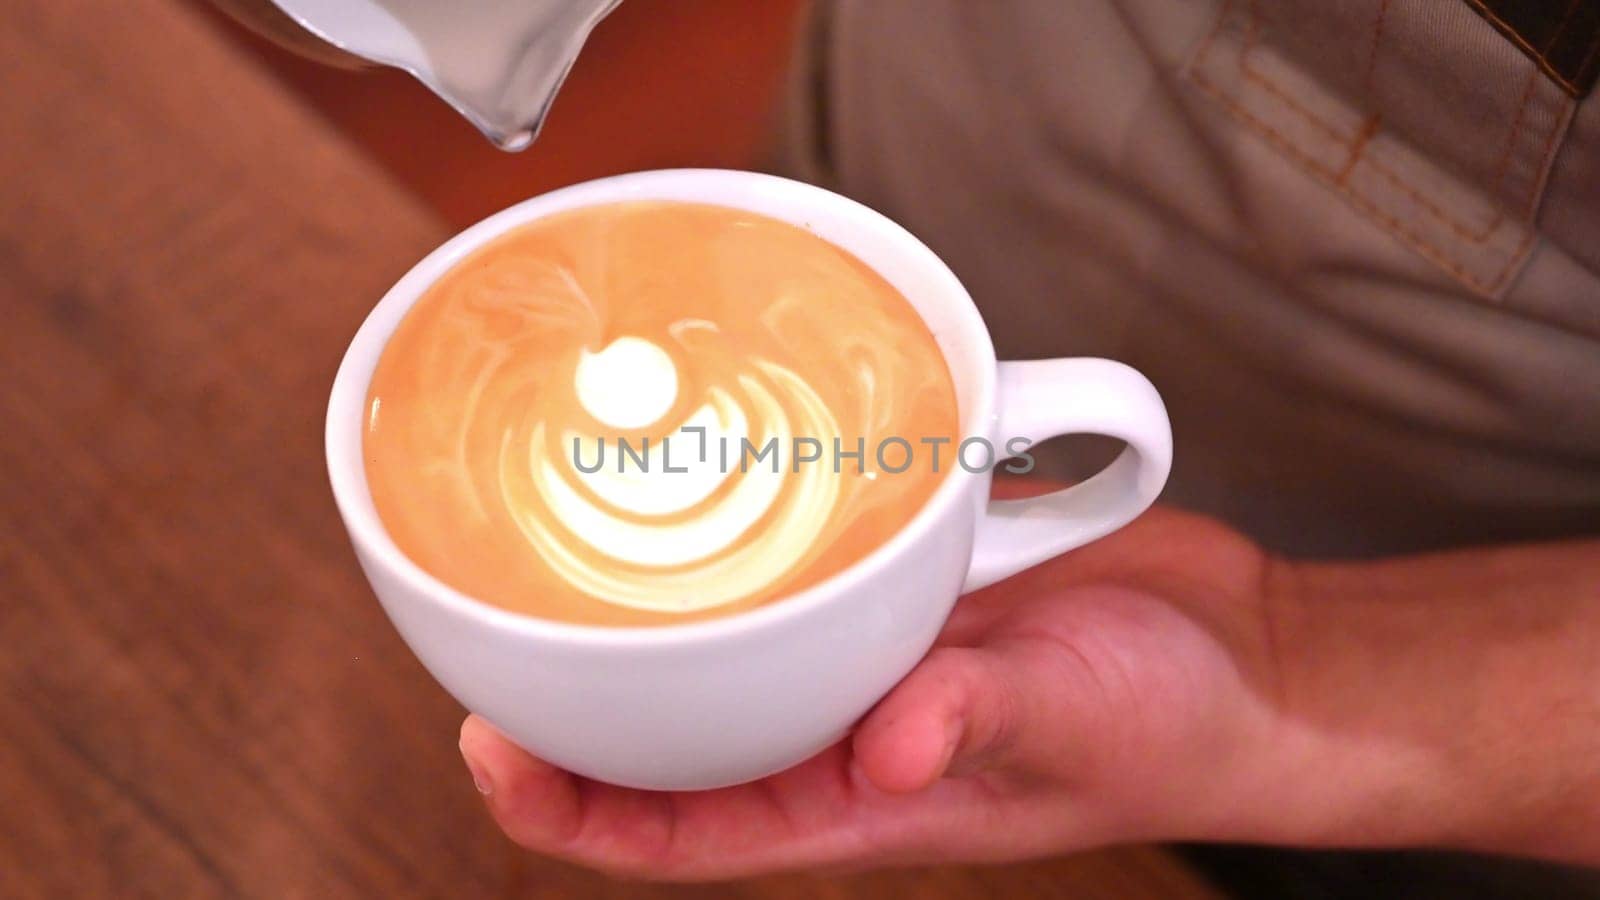 Barista pouring milk making a coffee latte art. People pour milk to making latte art coffee at cafe or coffe shop. by Peruphotoart